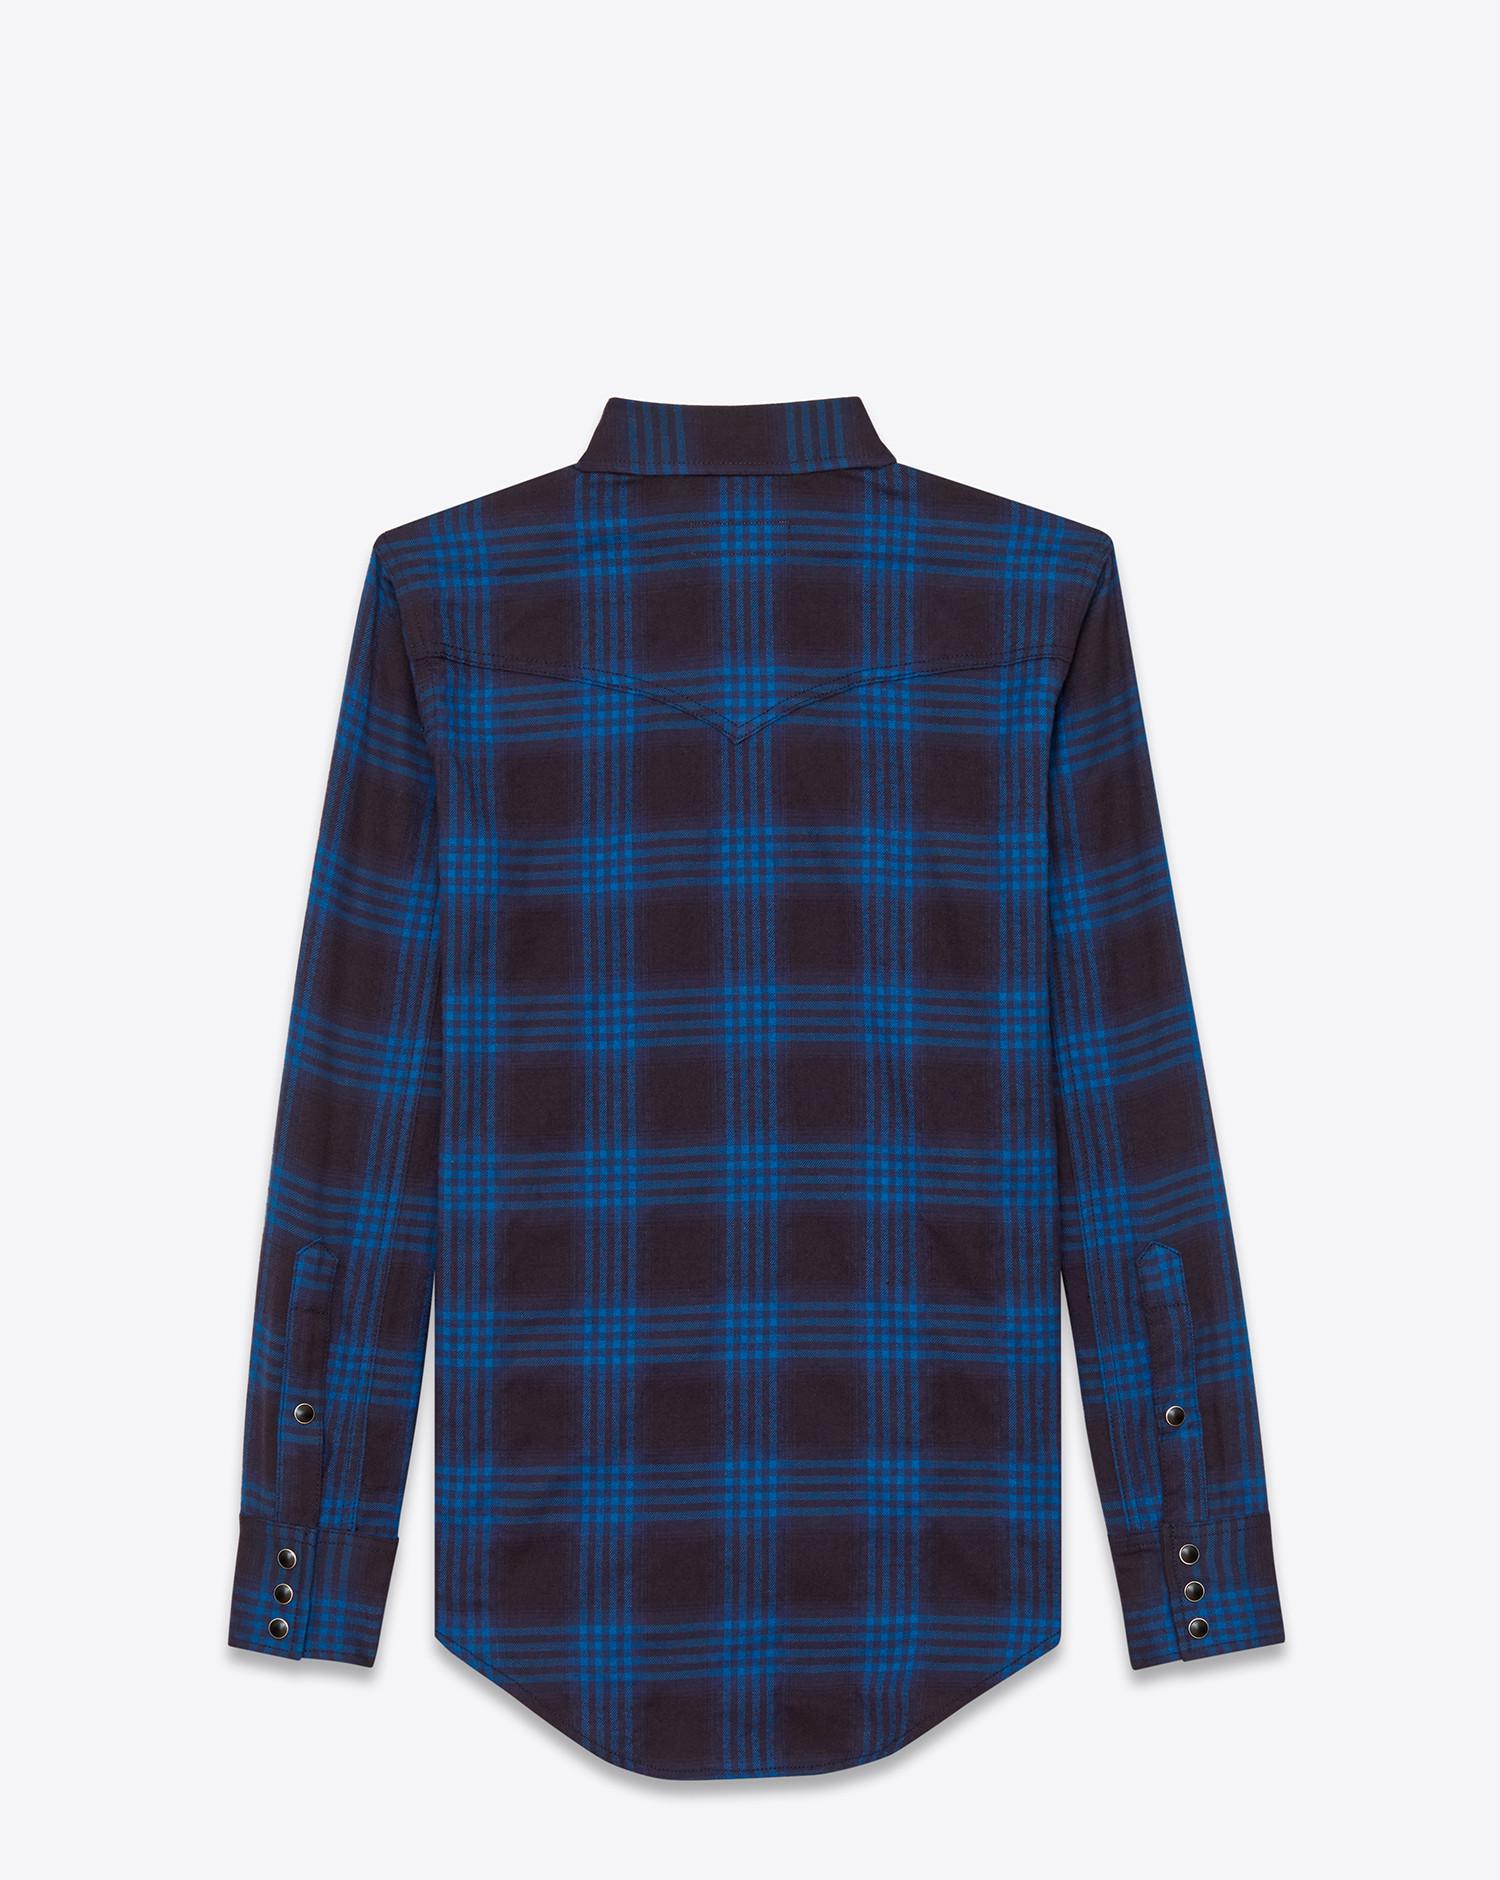 Saint Laurent Western Shirt In Navy Blue And Ink Blue Plaid Cotton And